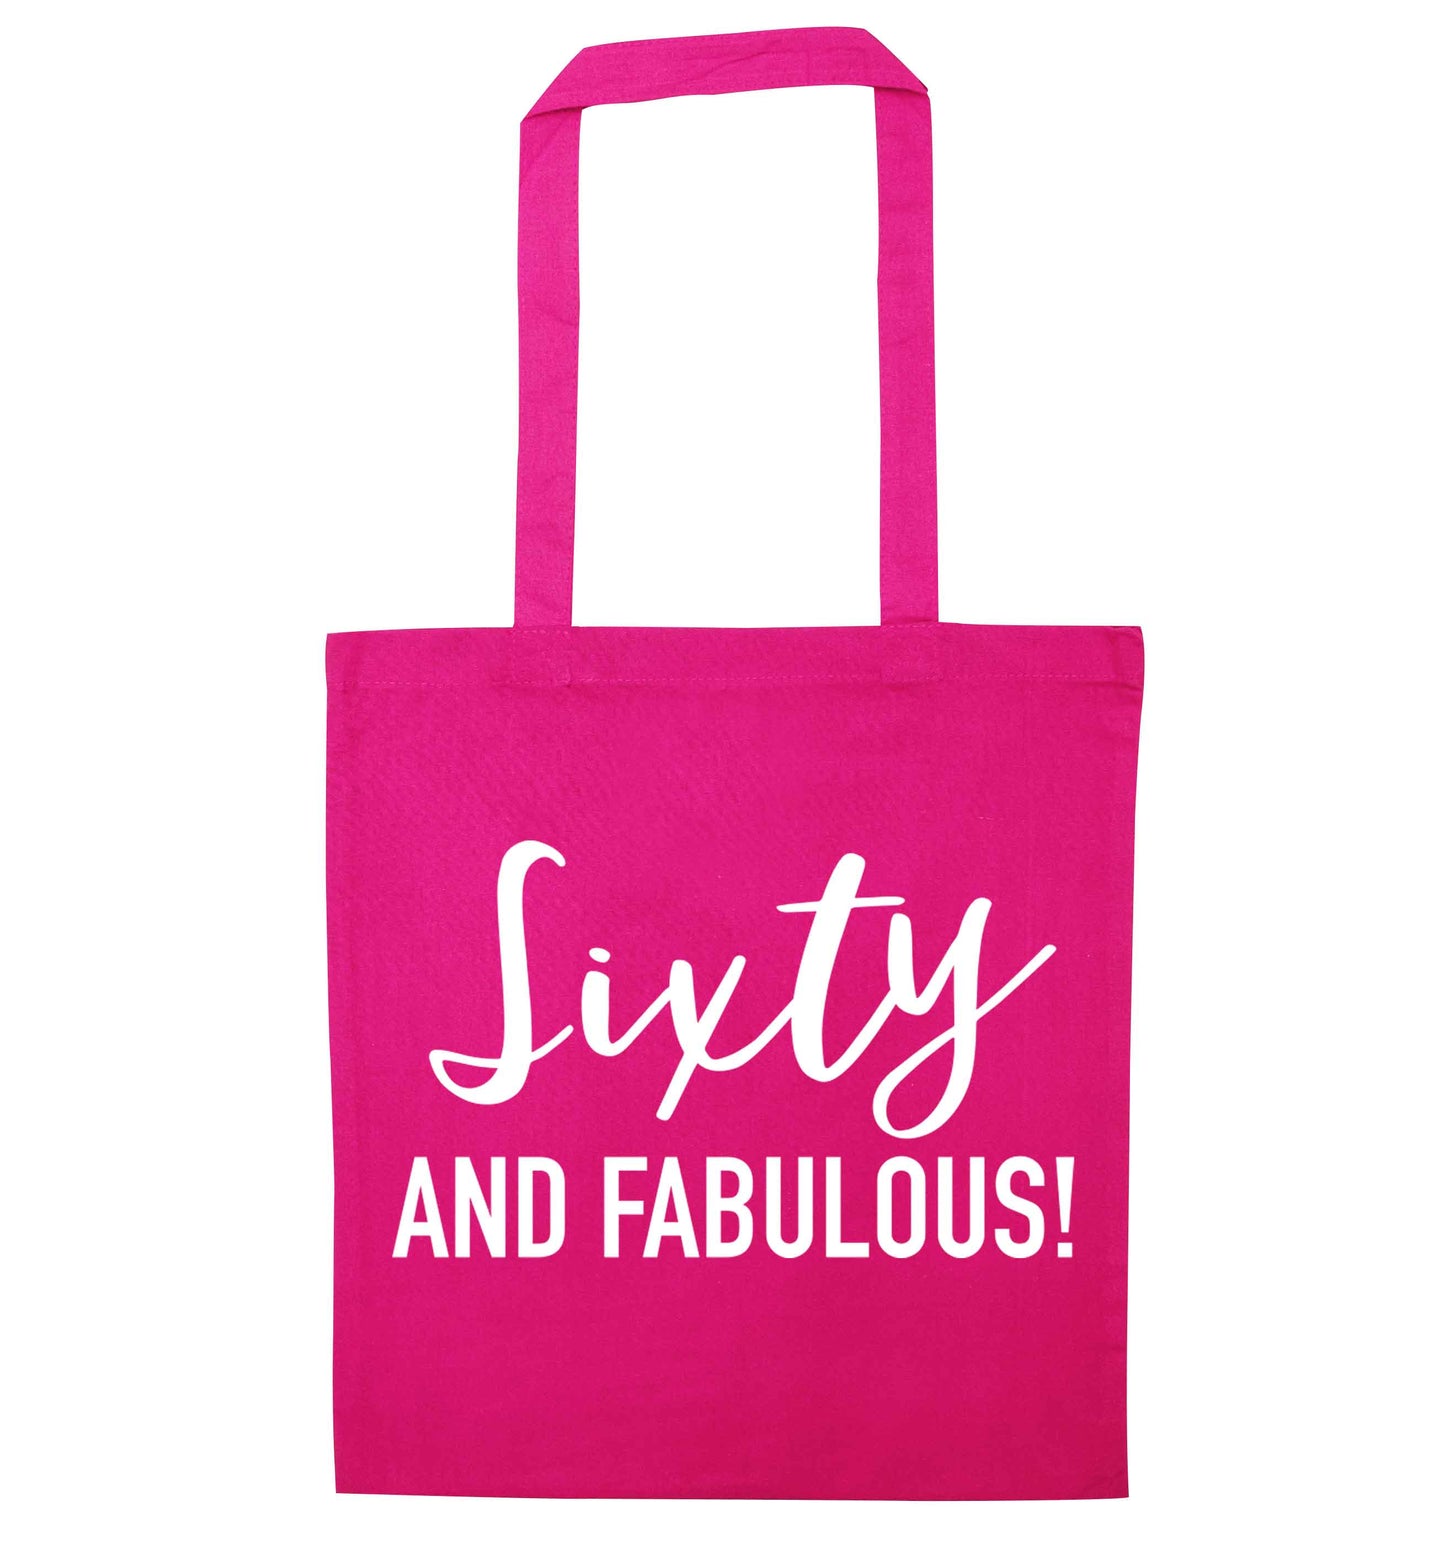 Sixty and fabulous pink tote bag